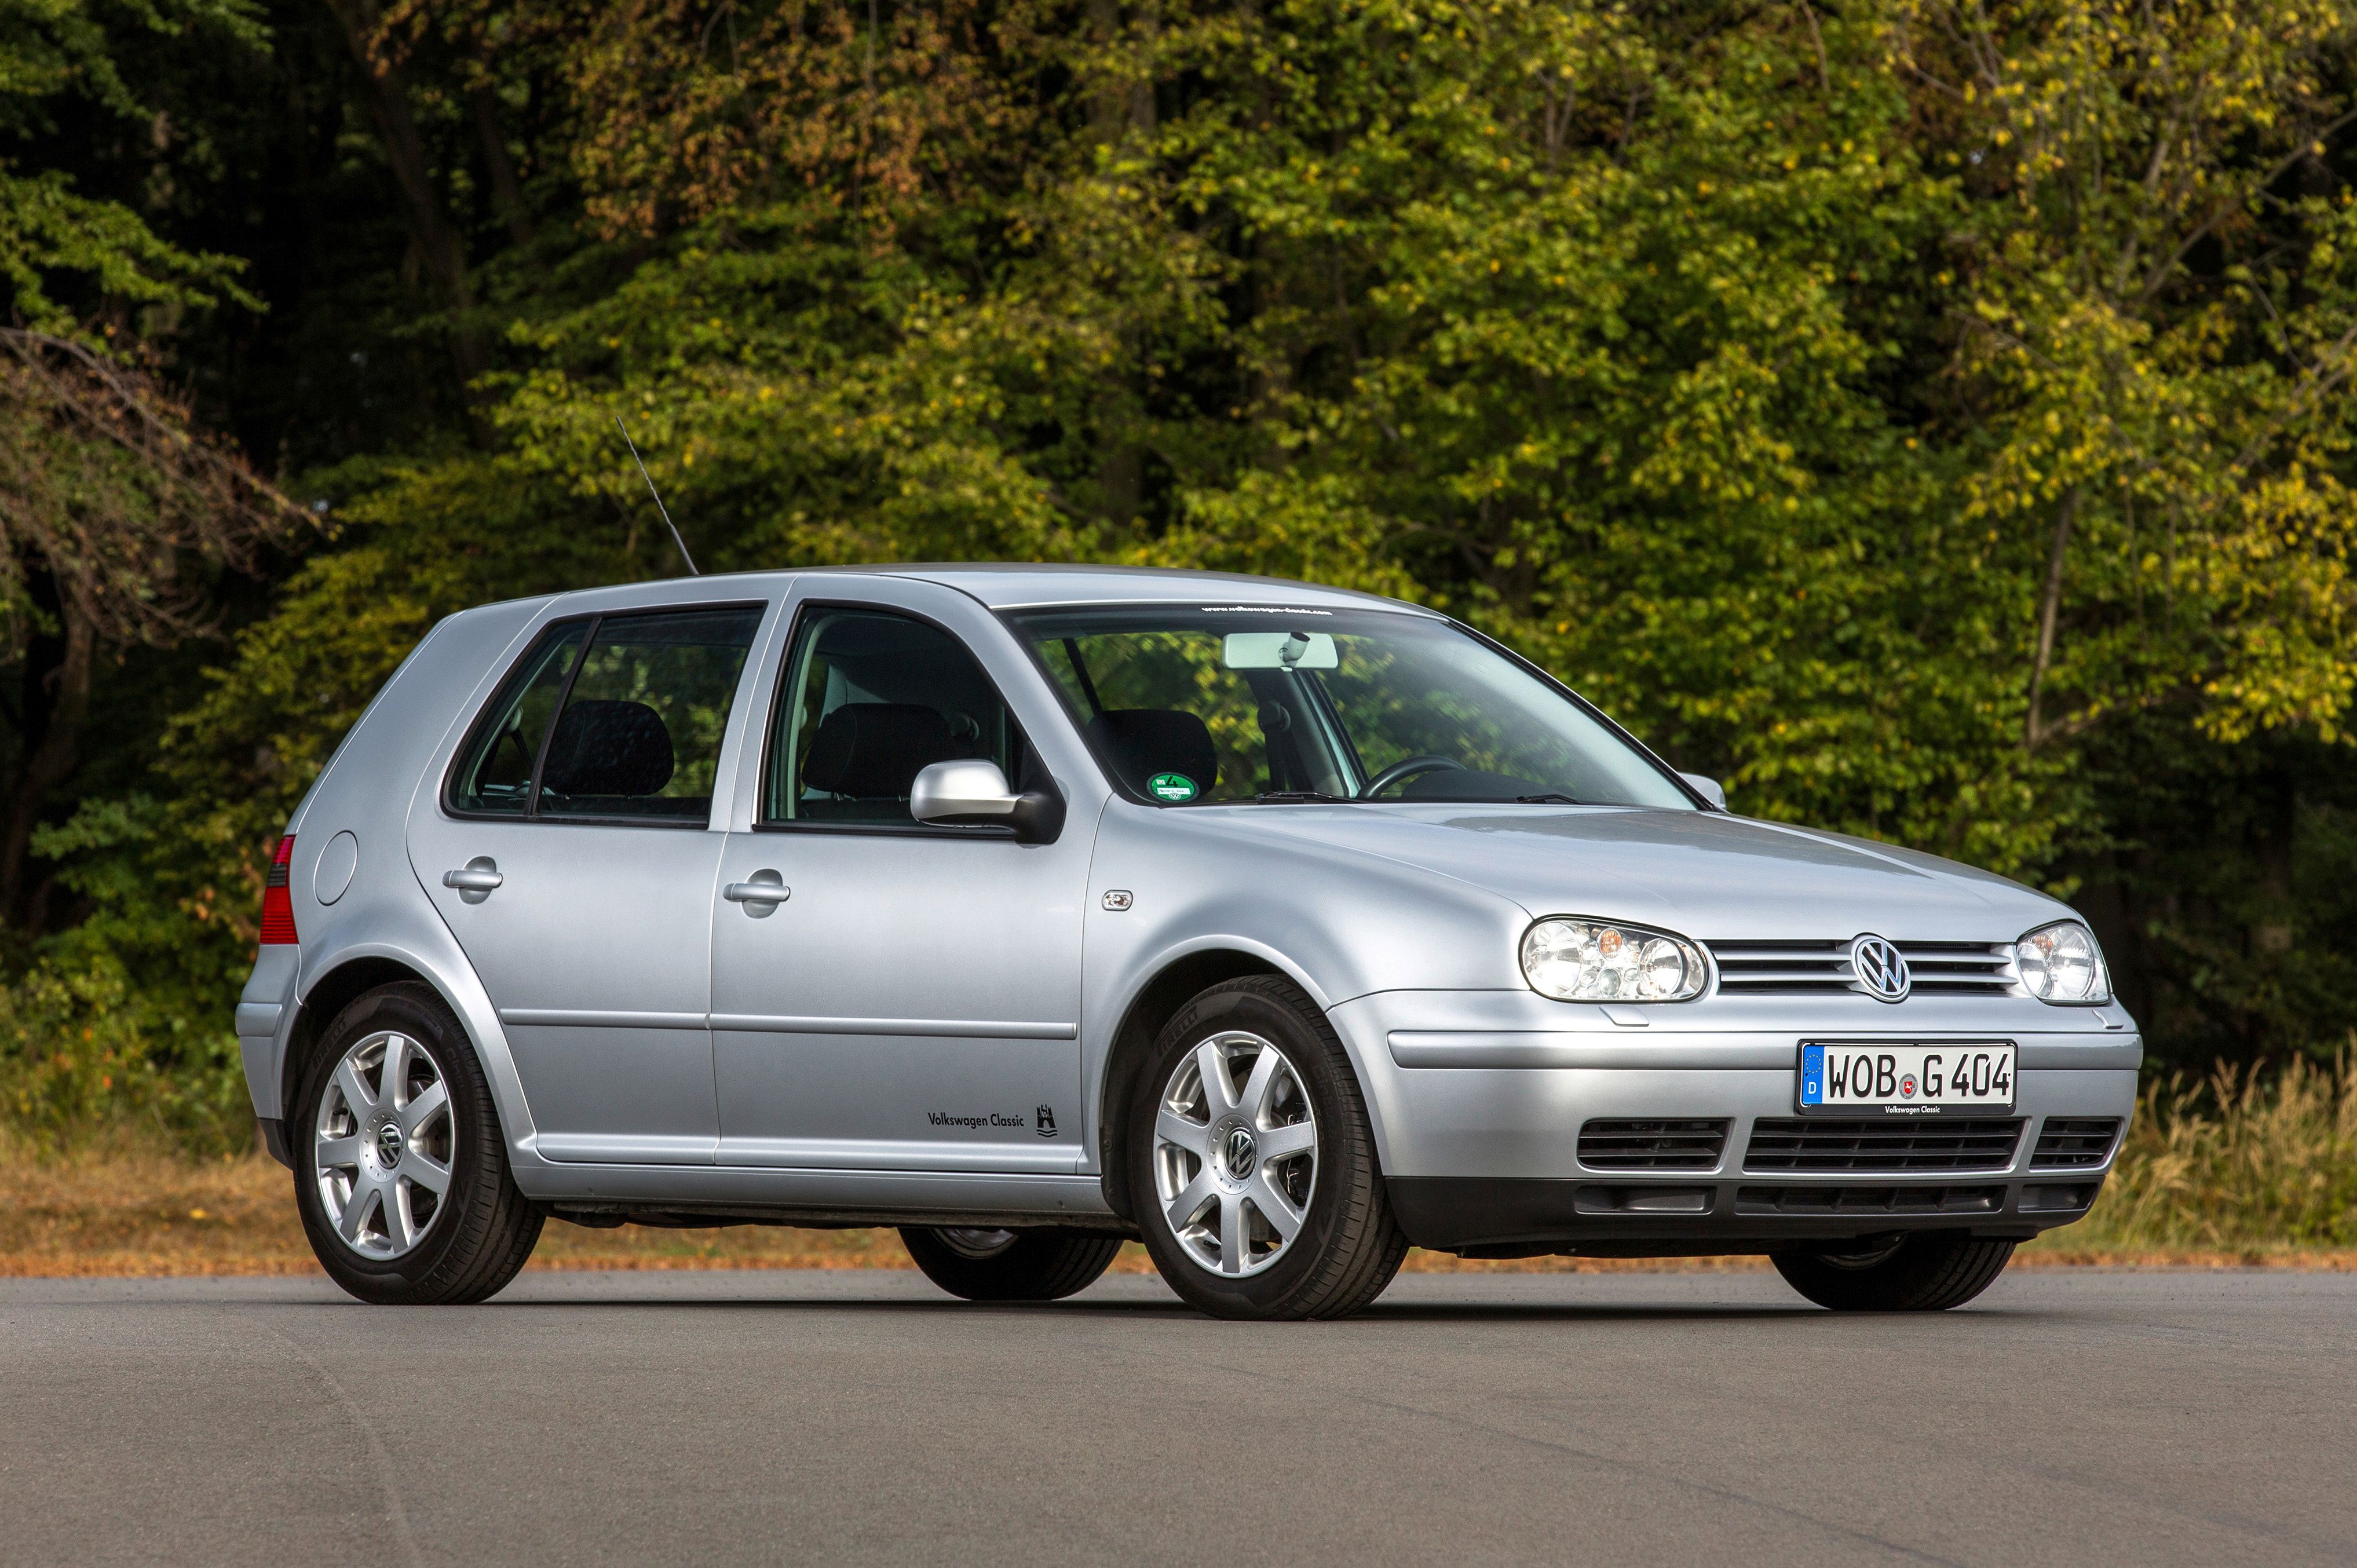 Volkswagen Golf - Everything You Need to Know About One the Best, Most Boring Cars Made